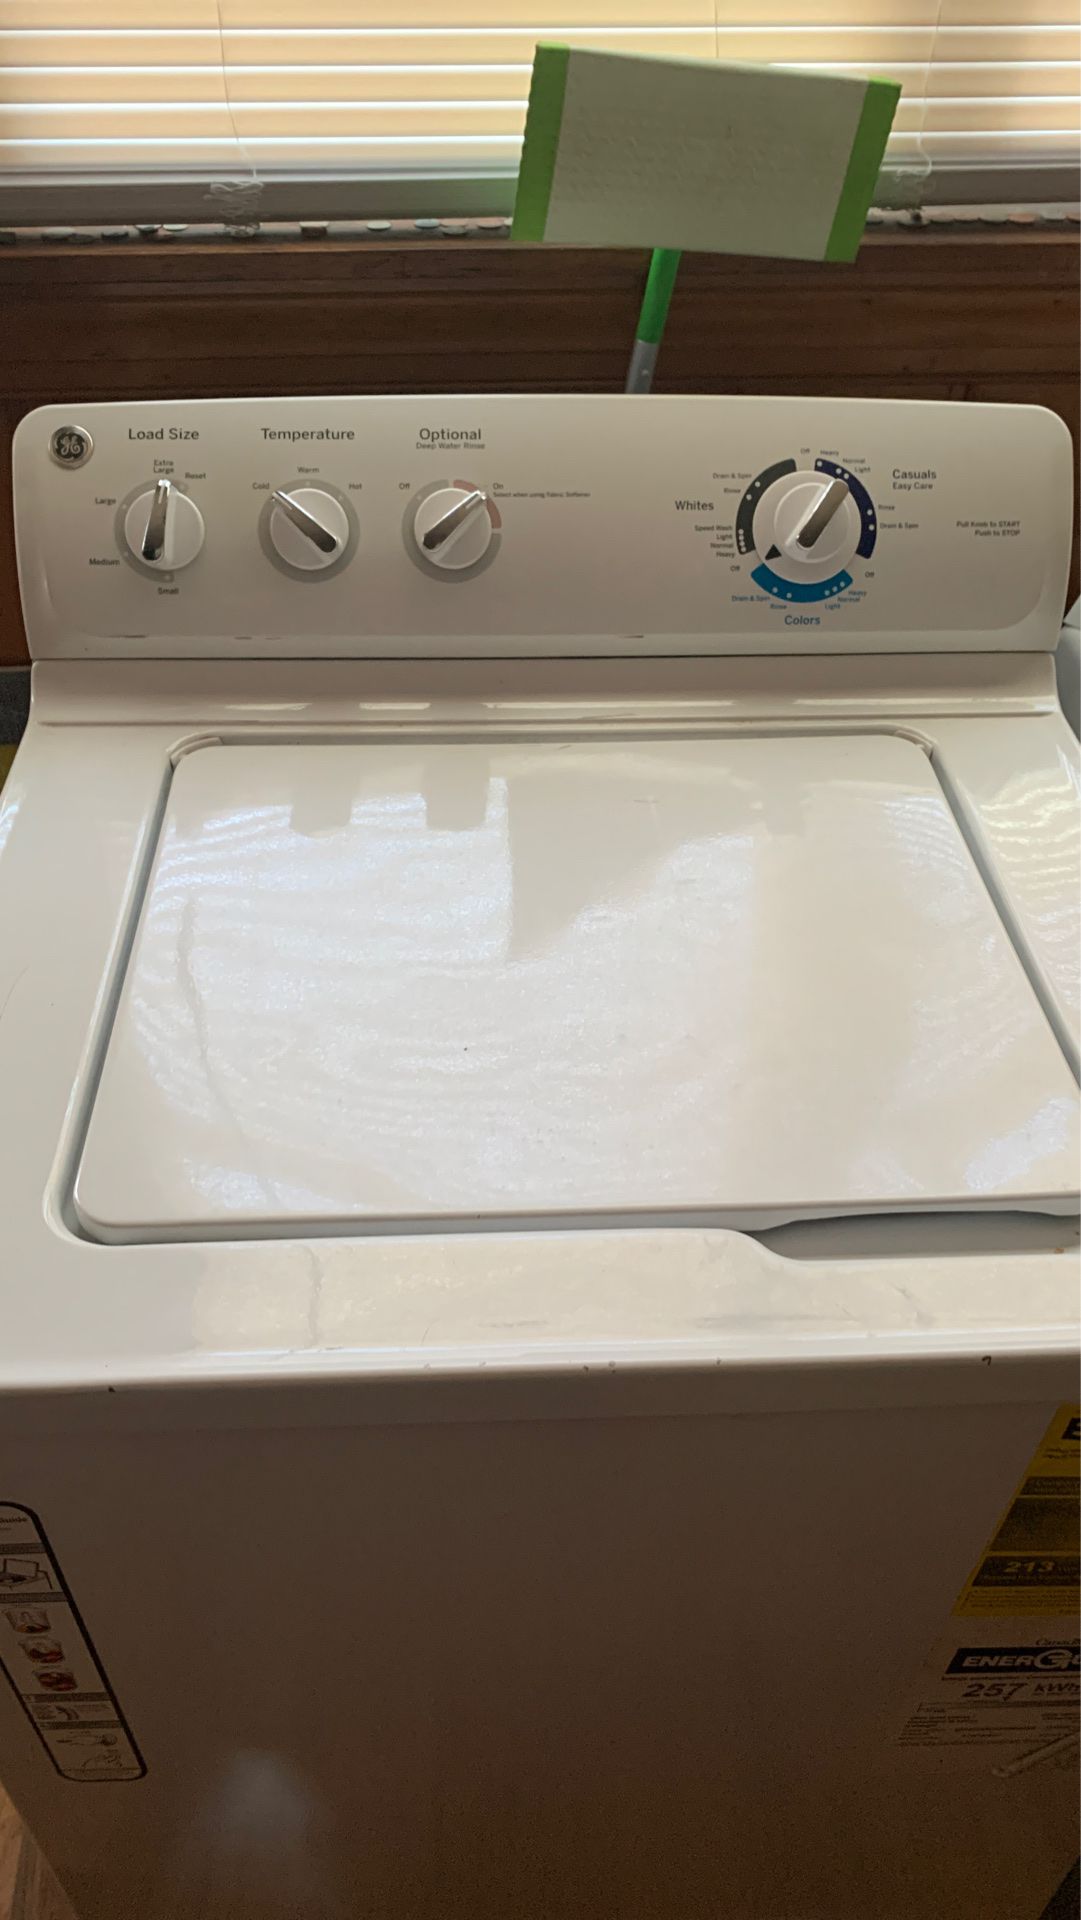 Selling GE washer. The center is off-balance so it makes a loud noise why it’s running. Works really well is about 3 1/2 years old washers spins out